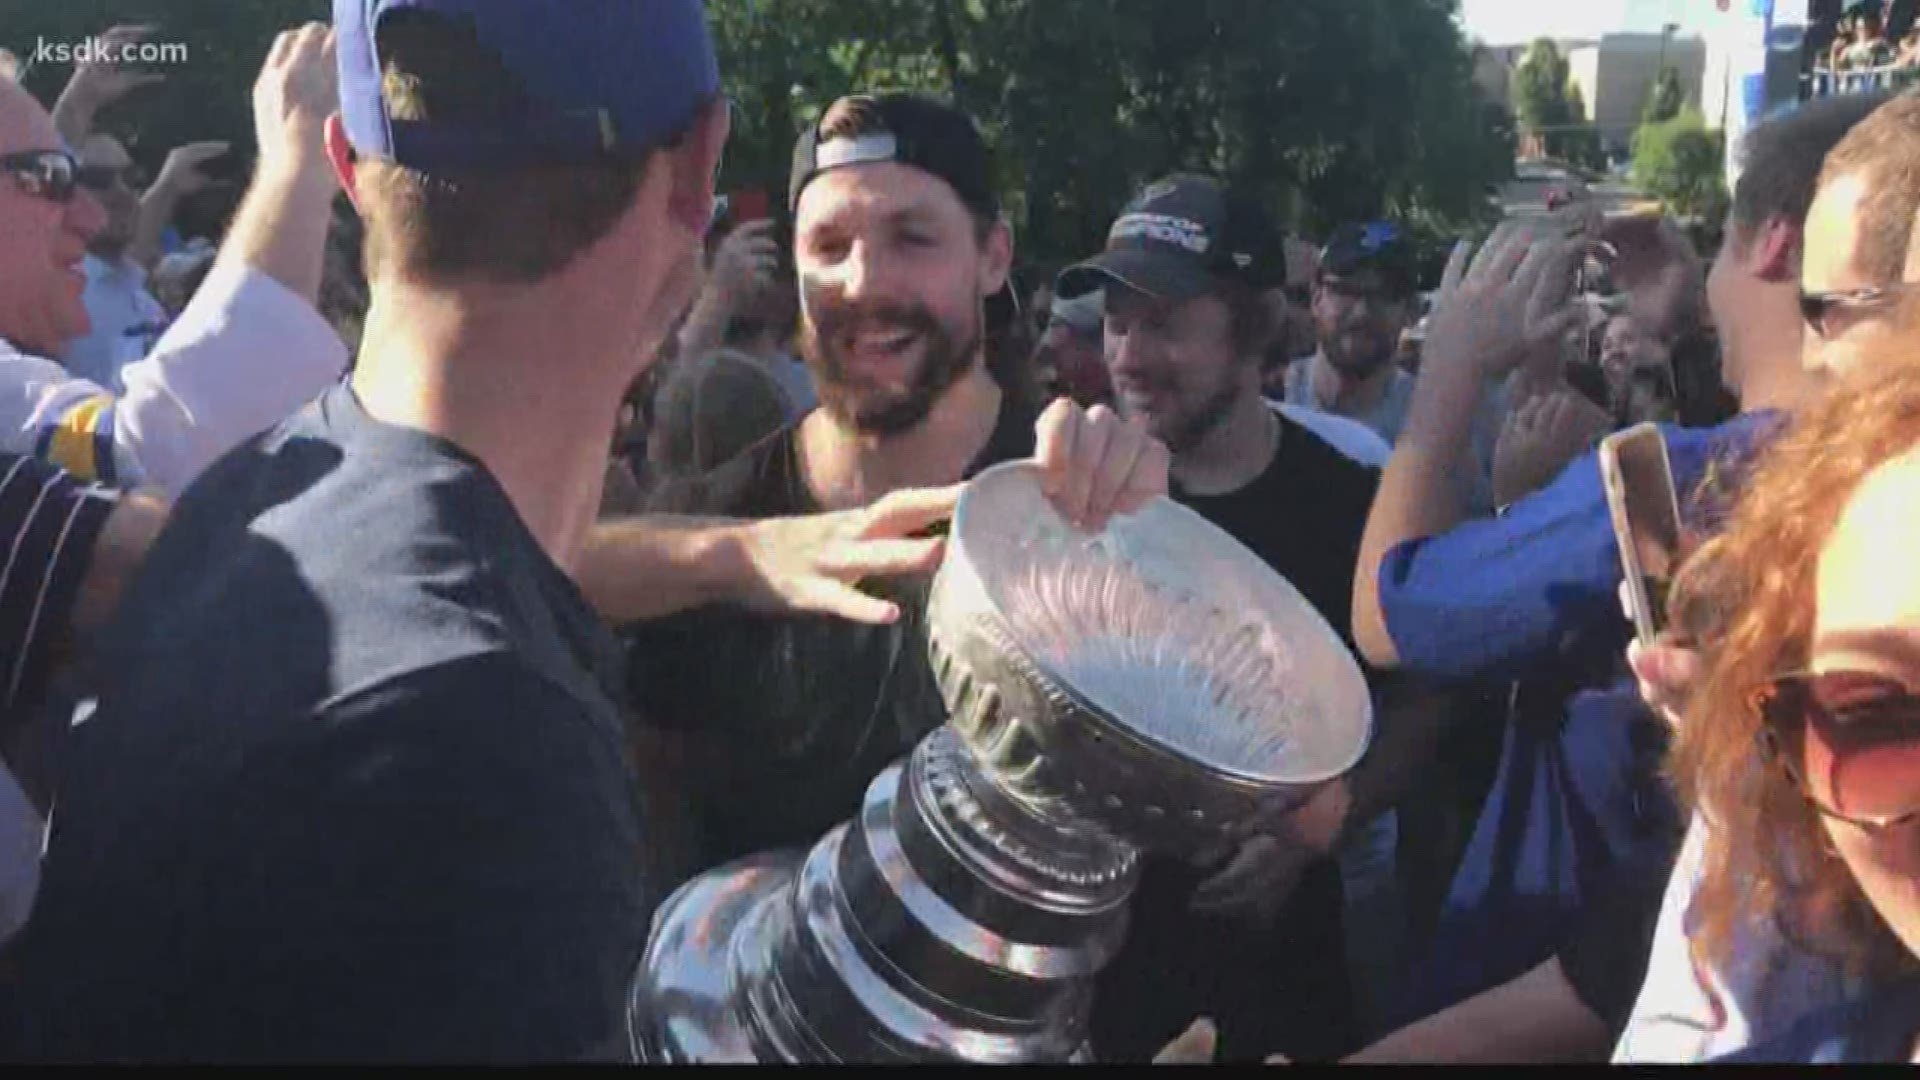 To party all day, you have to start early in the morning, and that's exactly what the Stanley Cup champion Blues did.